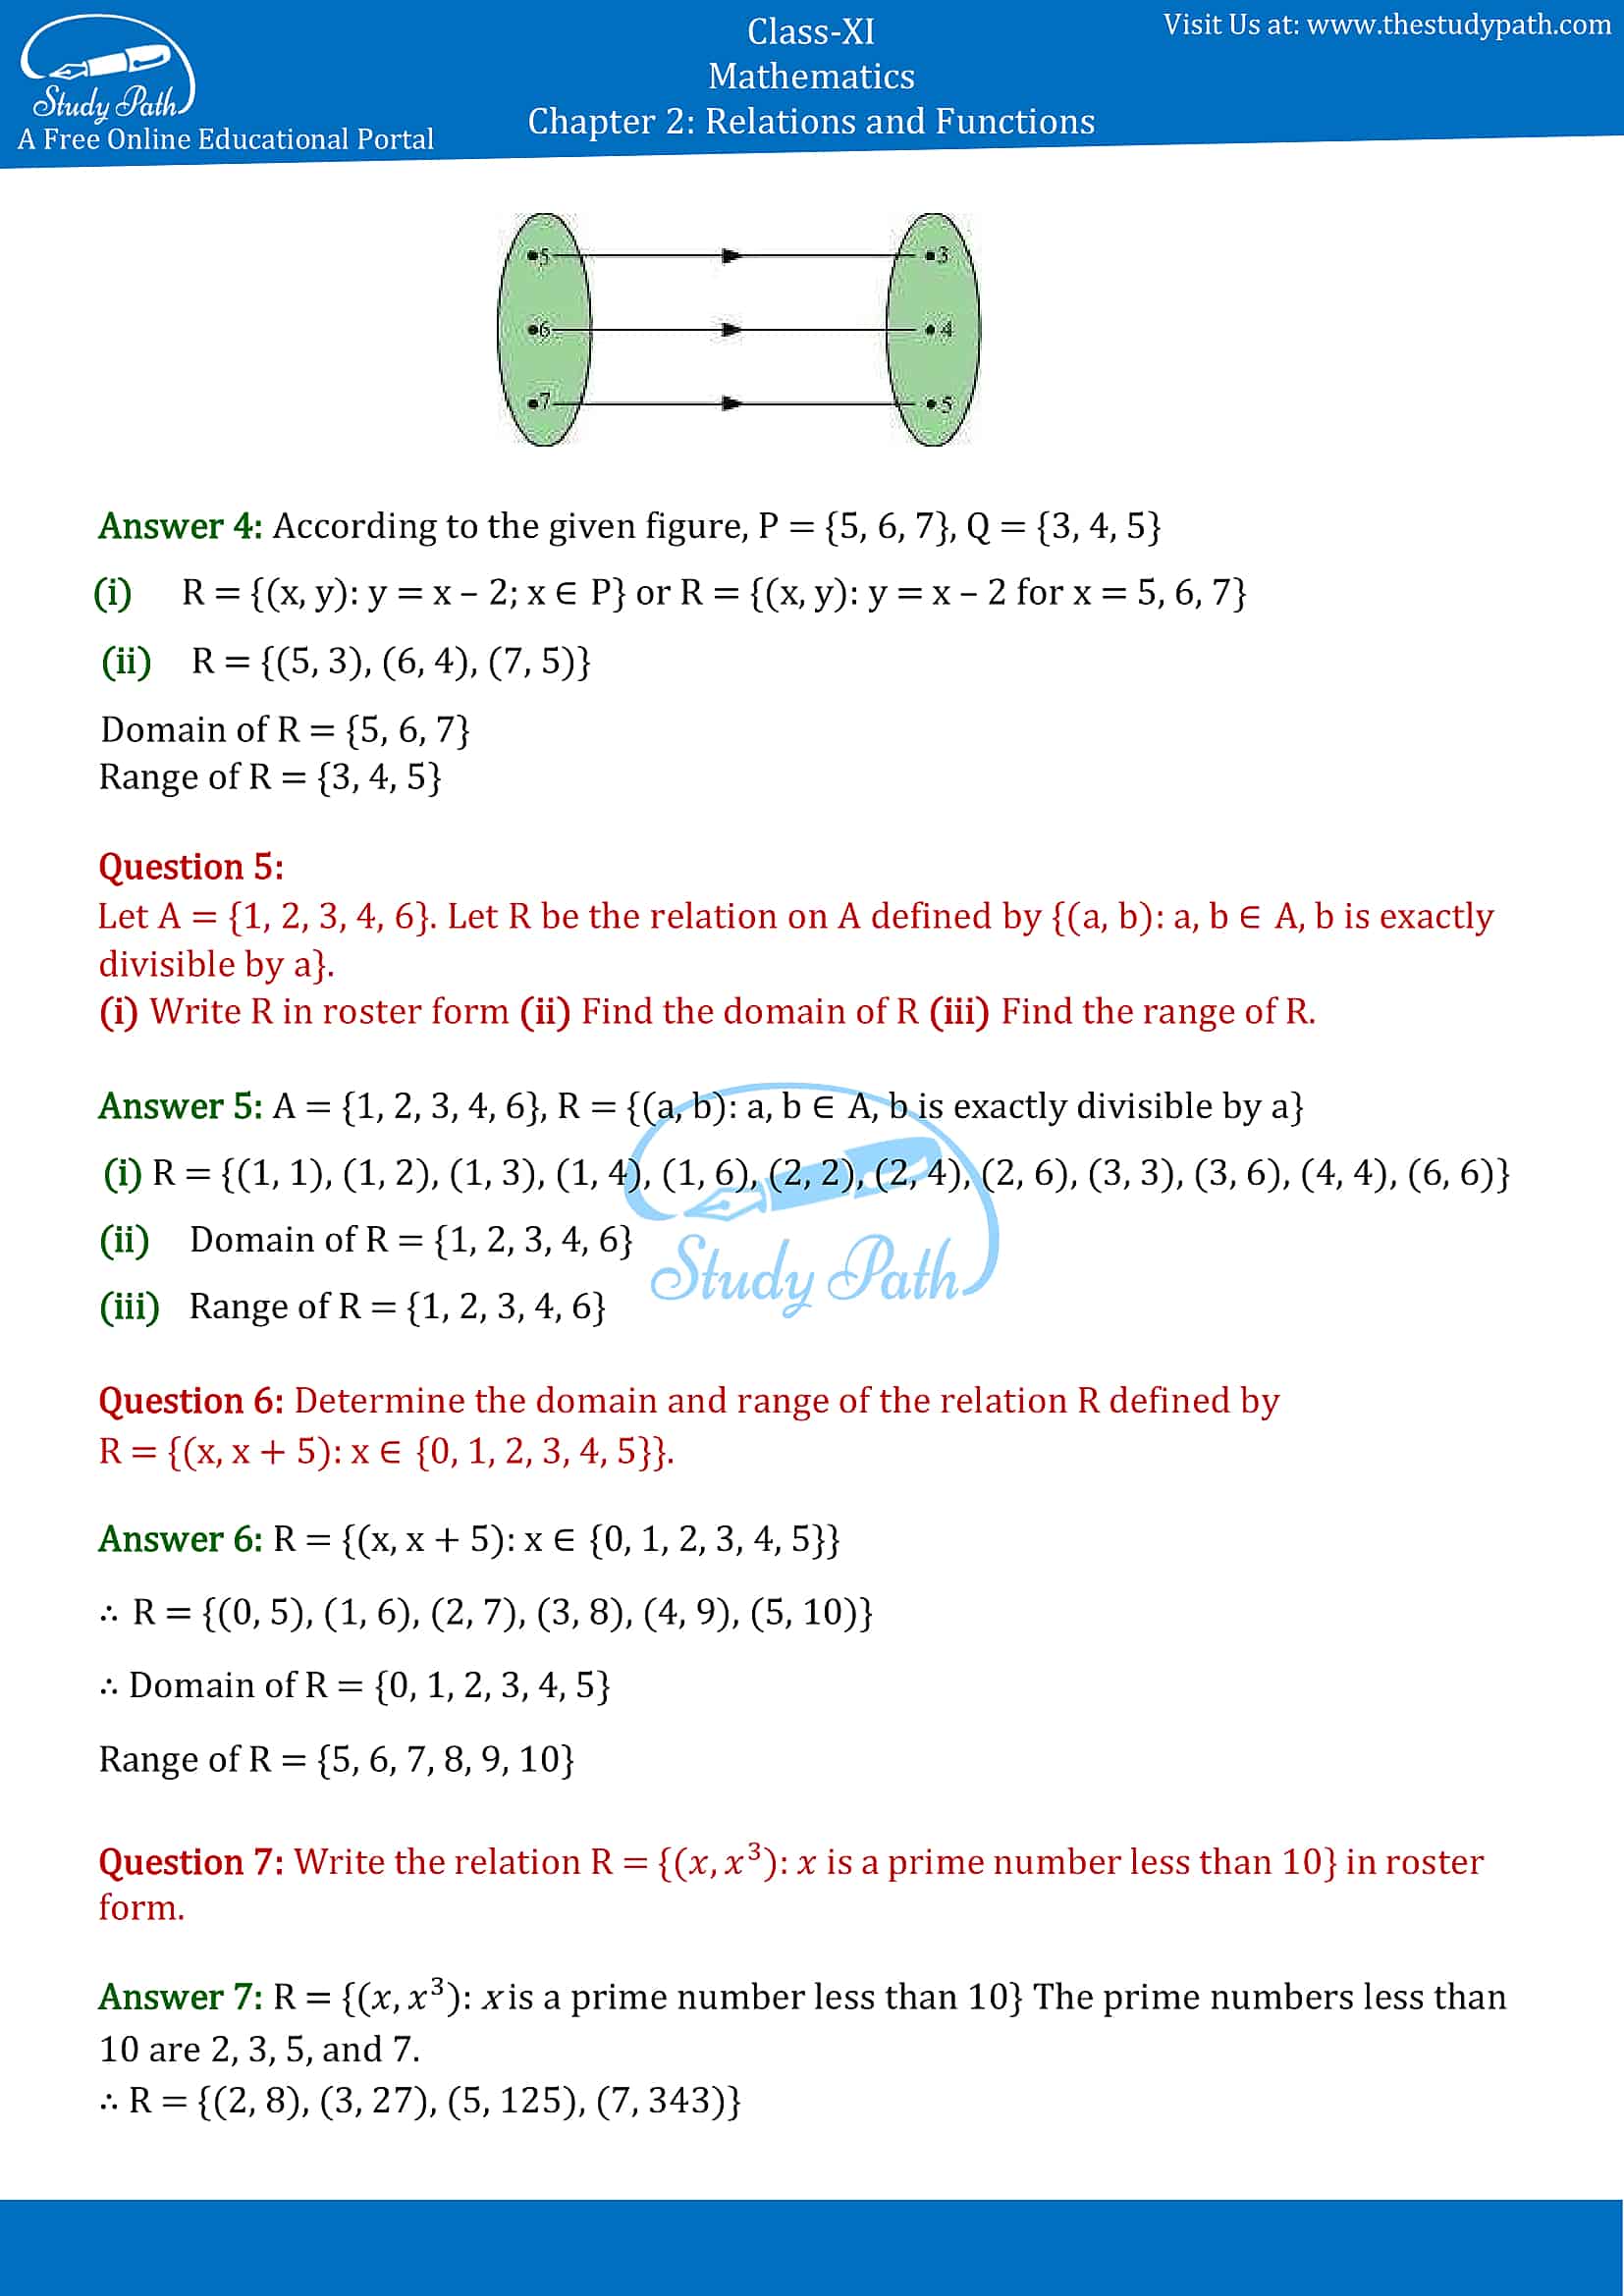 NCERT Solutions for Class 11 Maths Chapter 2 Relations and Functions Exercise 2.2